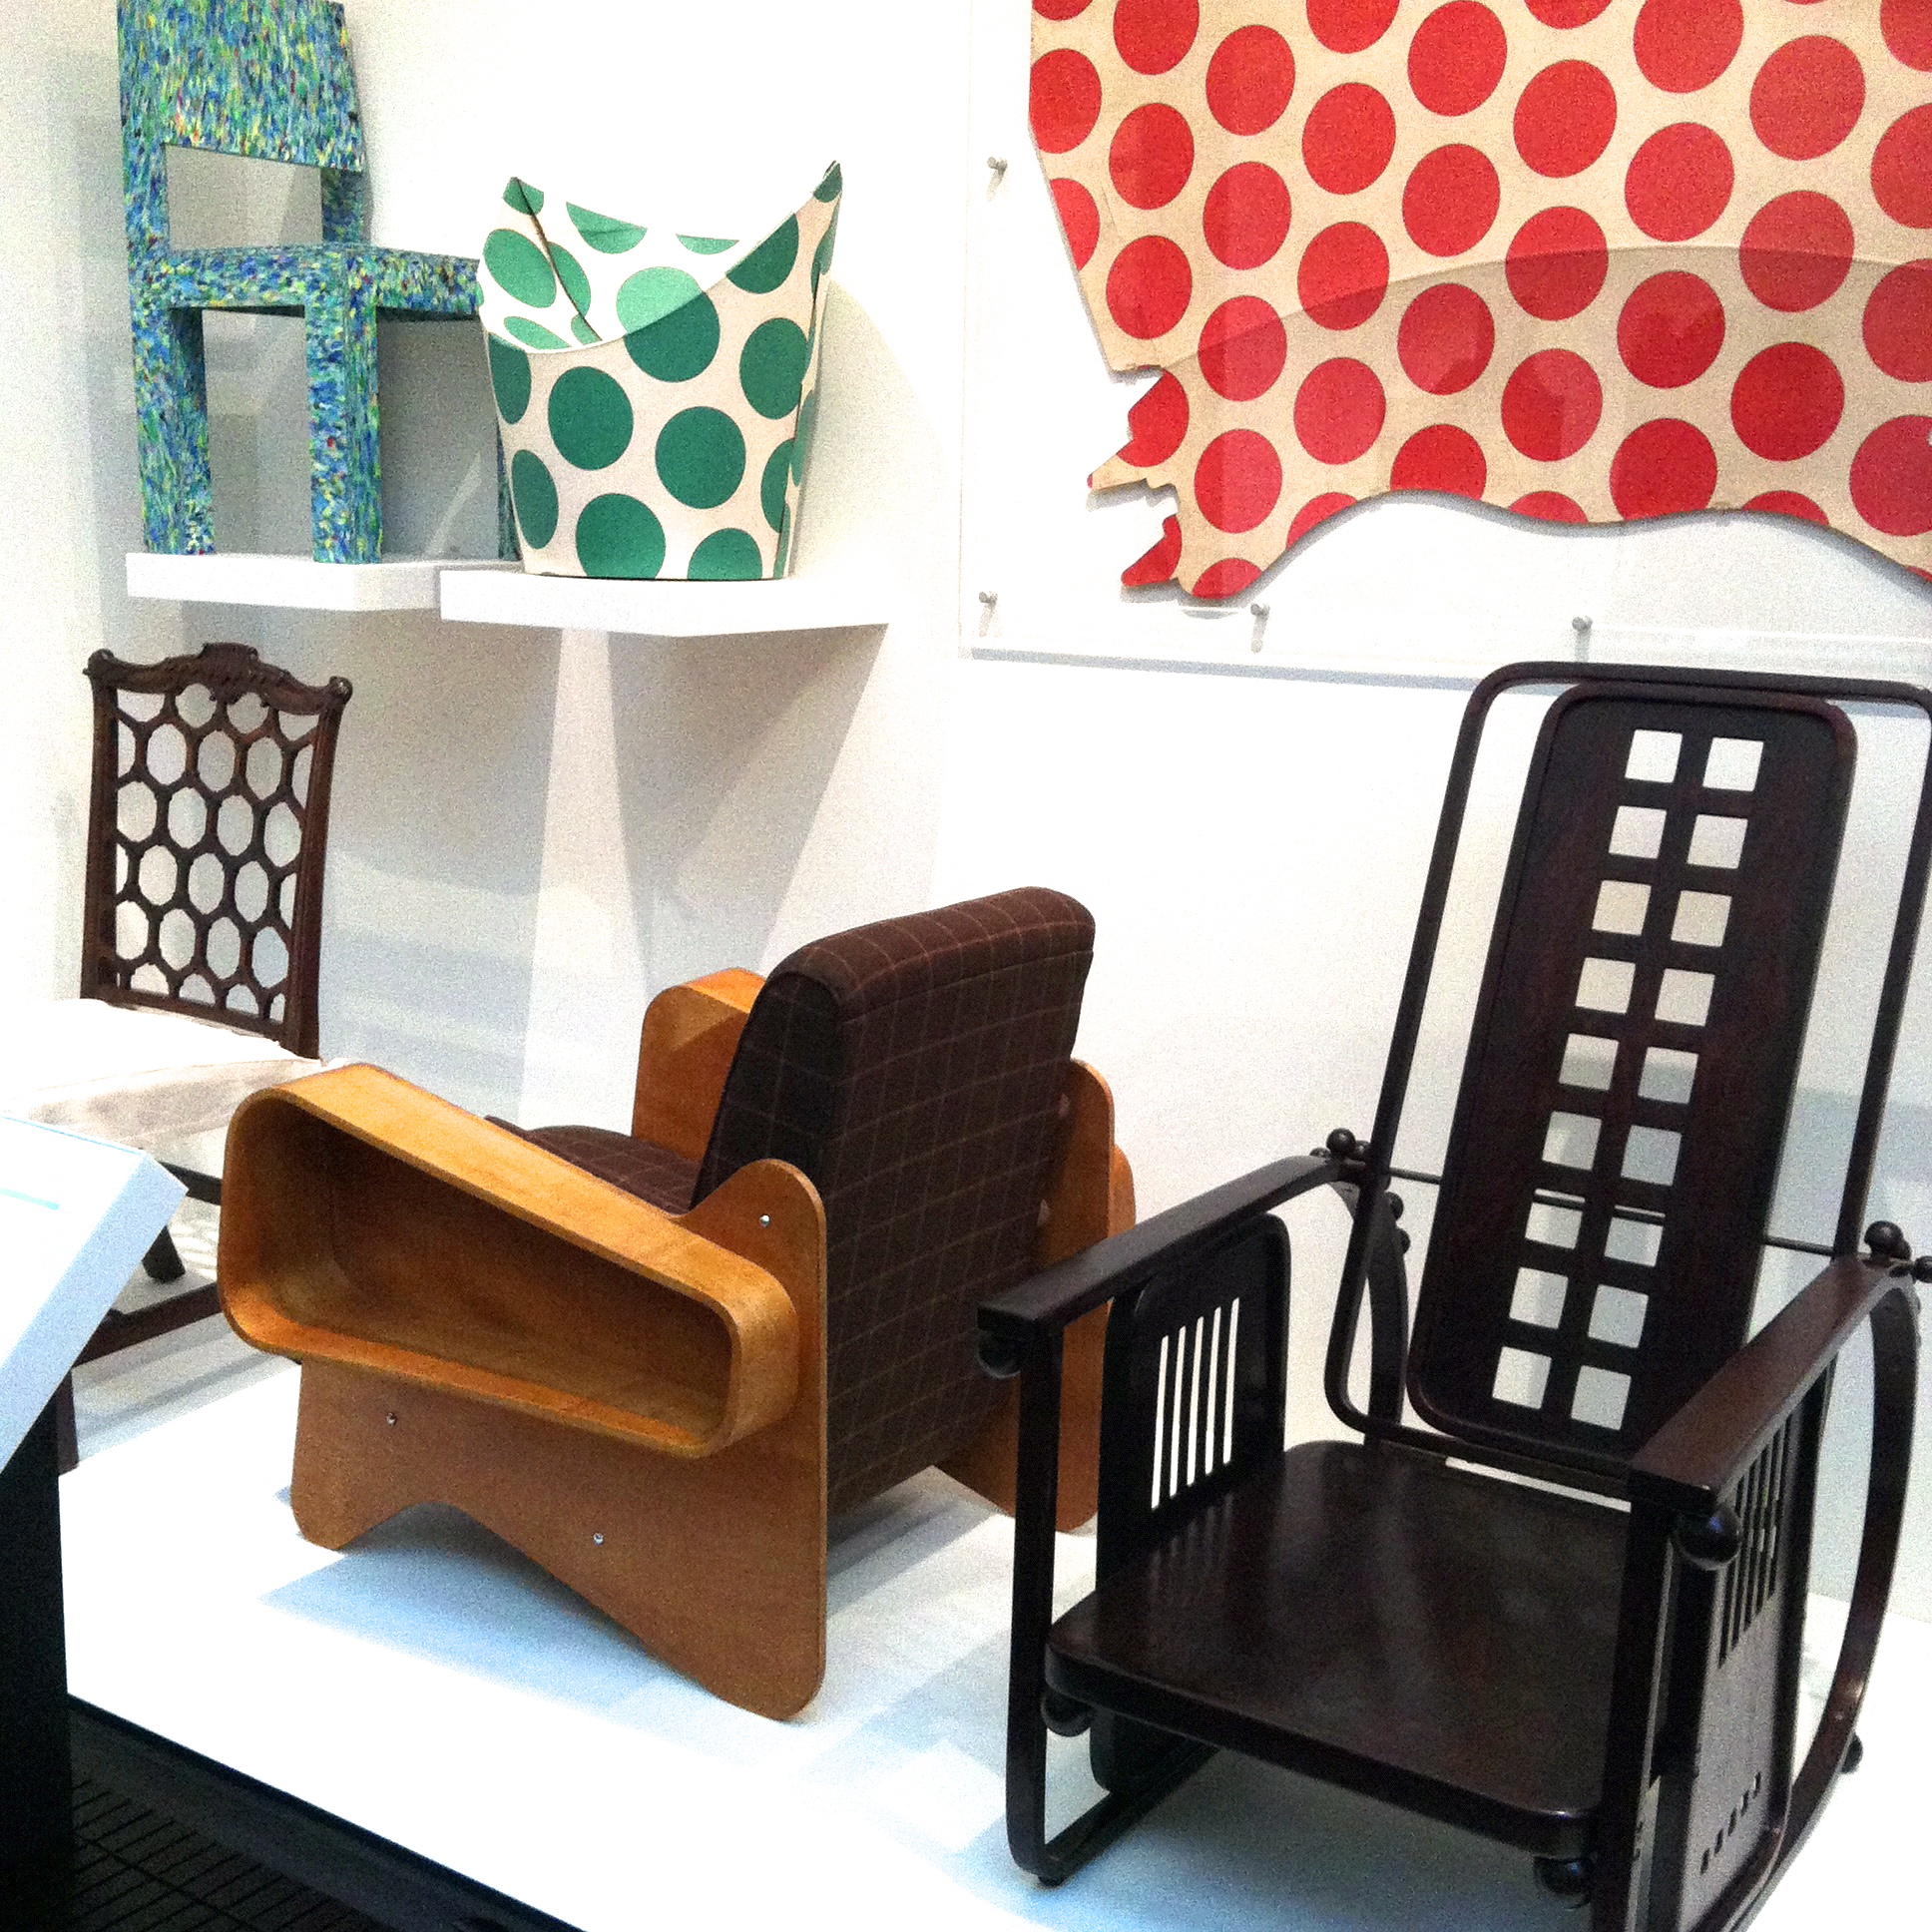 Plywood armchairs by Marcel Breuer (1936, left) and Josef Hoffmann (1908, right), with the spotted 'Child Chair' made from flat-packed cardboard